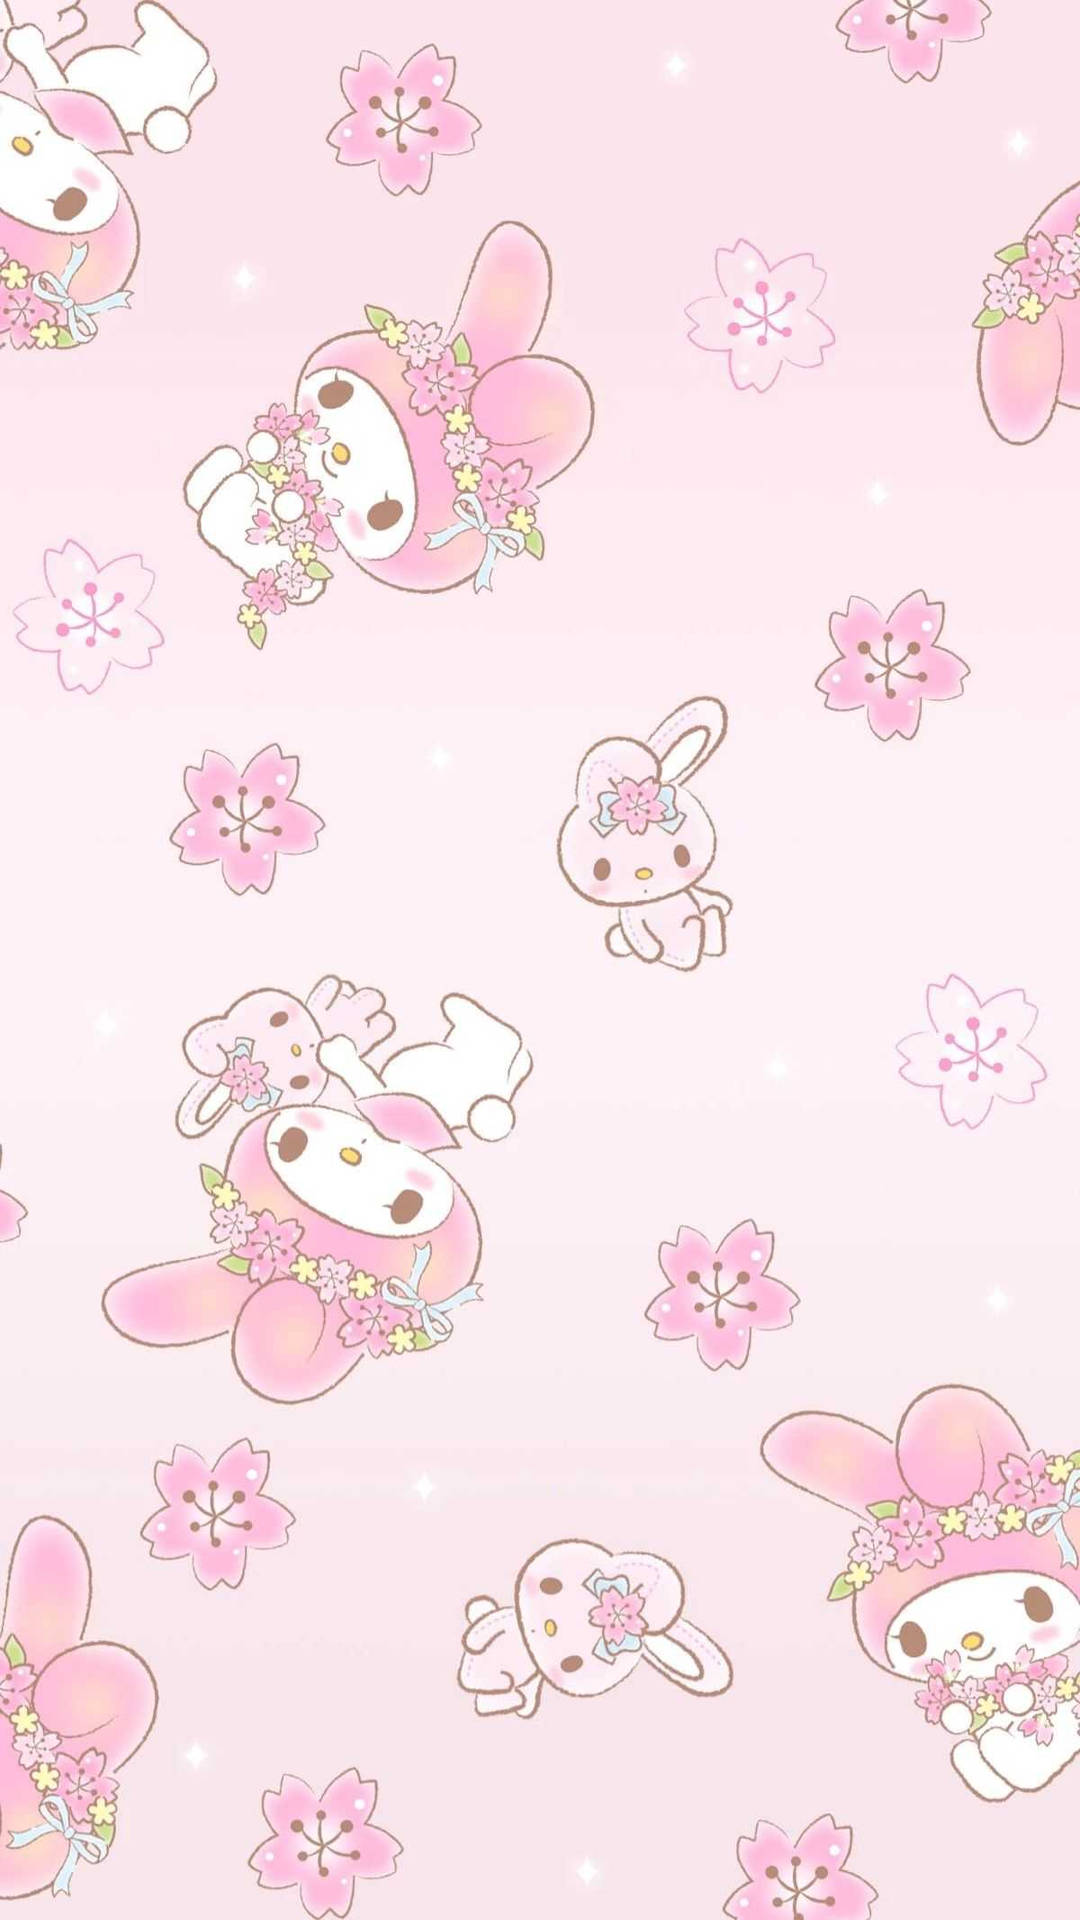 Keep smiling with Cute Sanrio Wallpaper